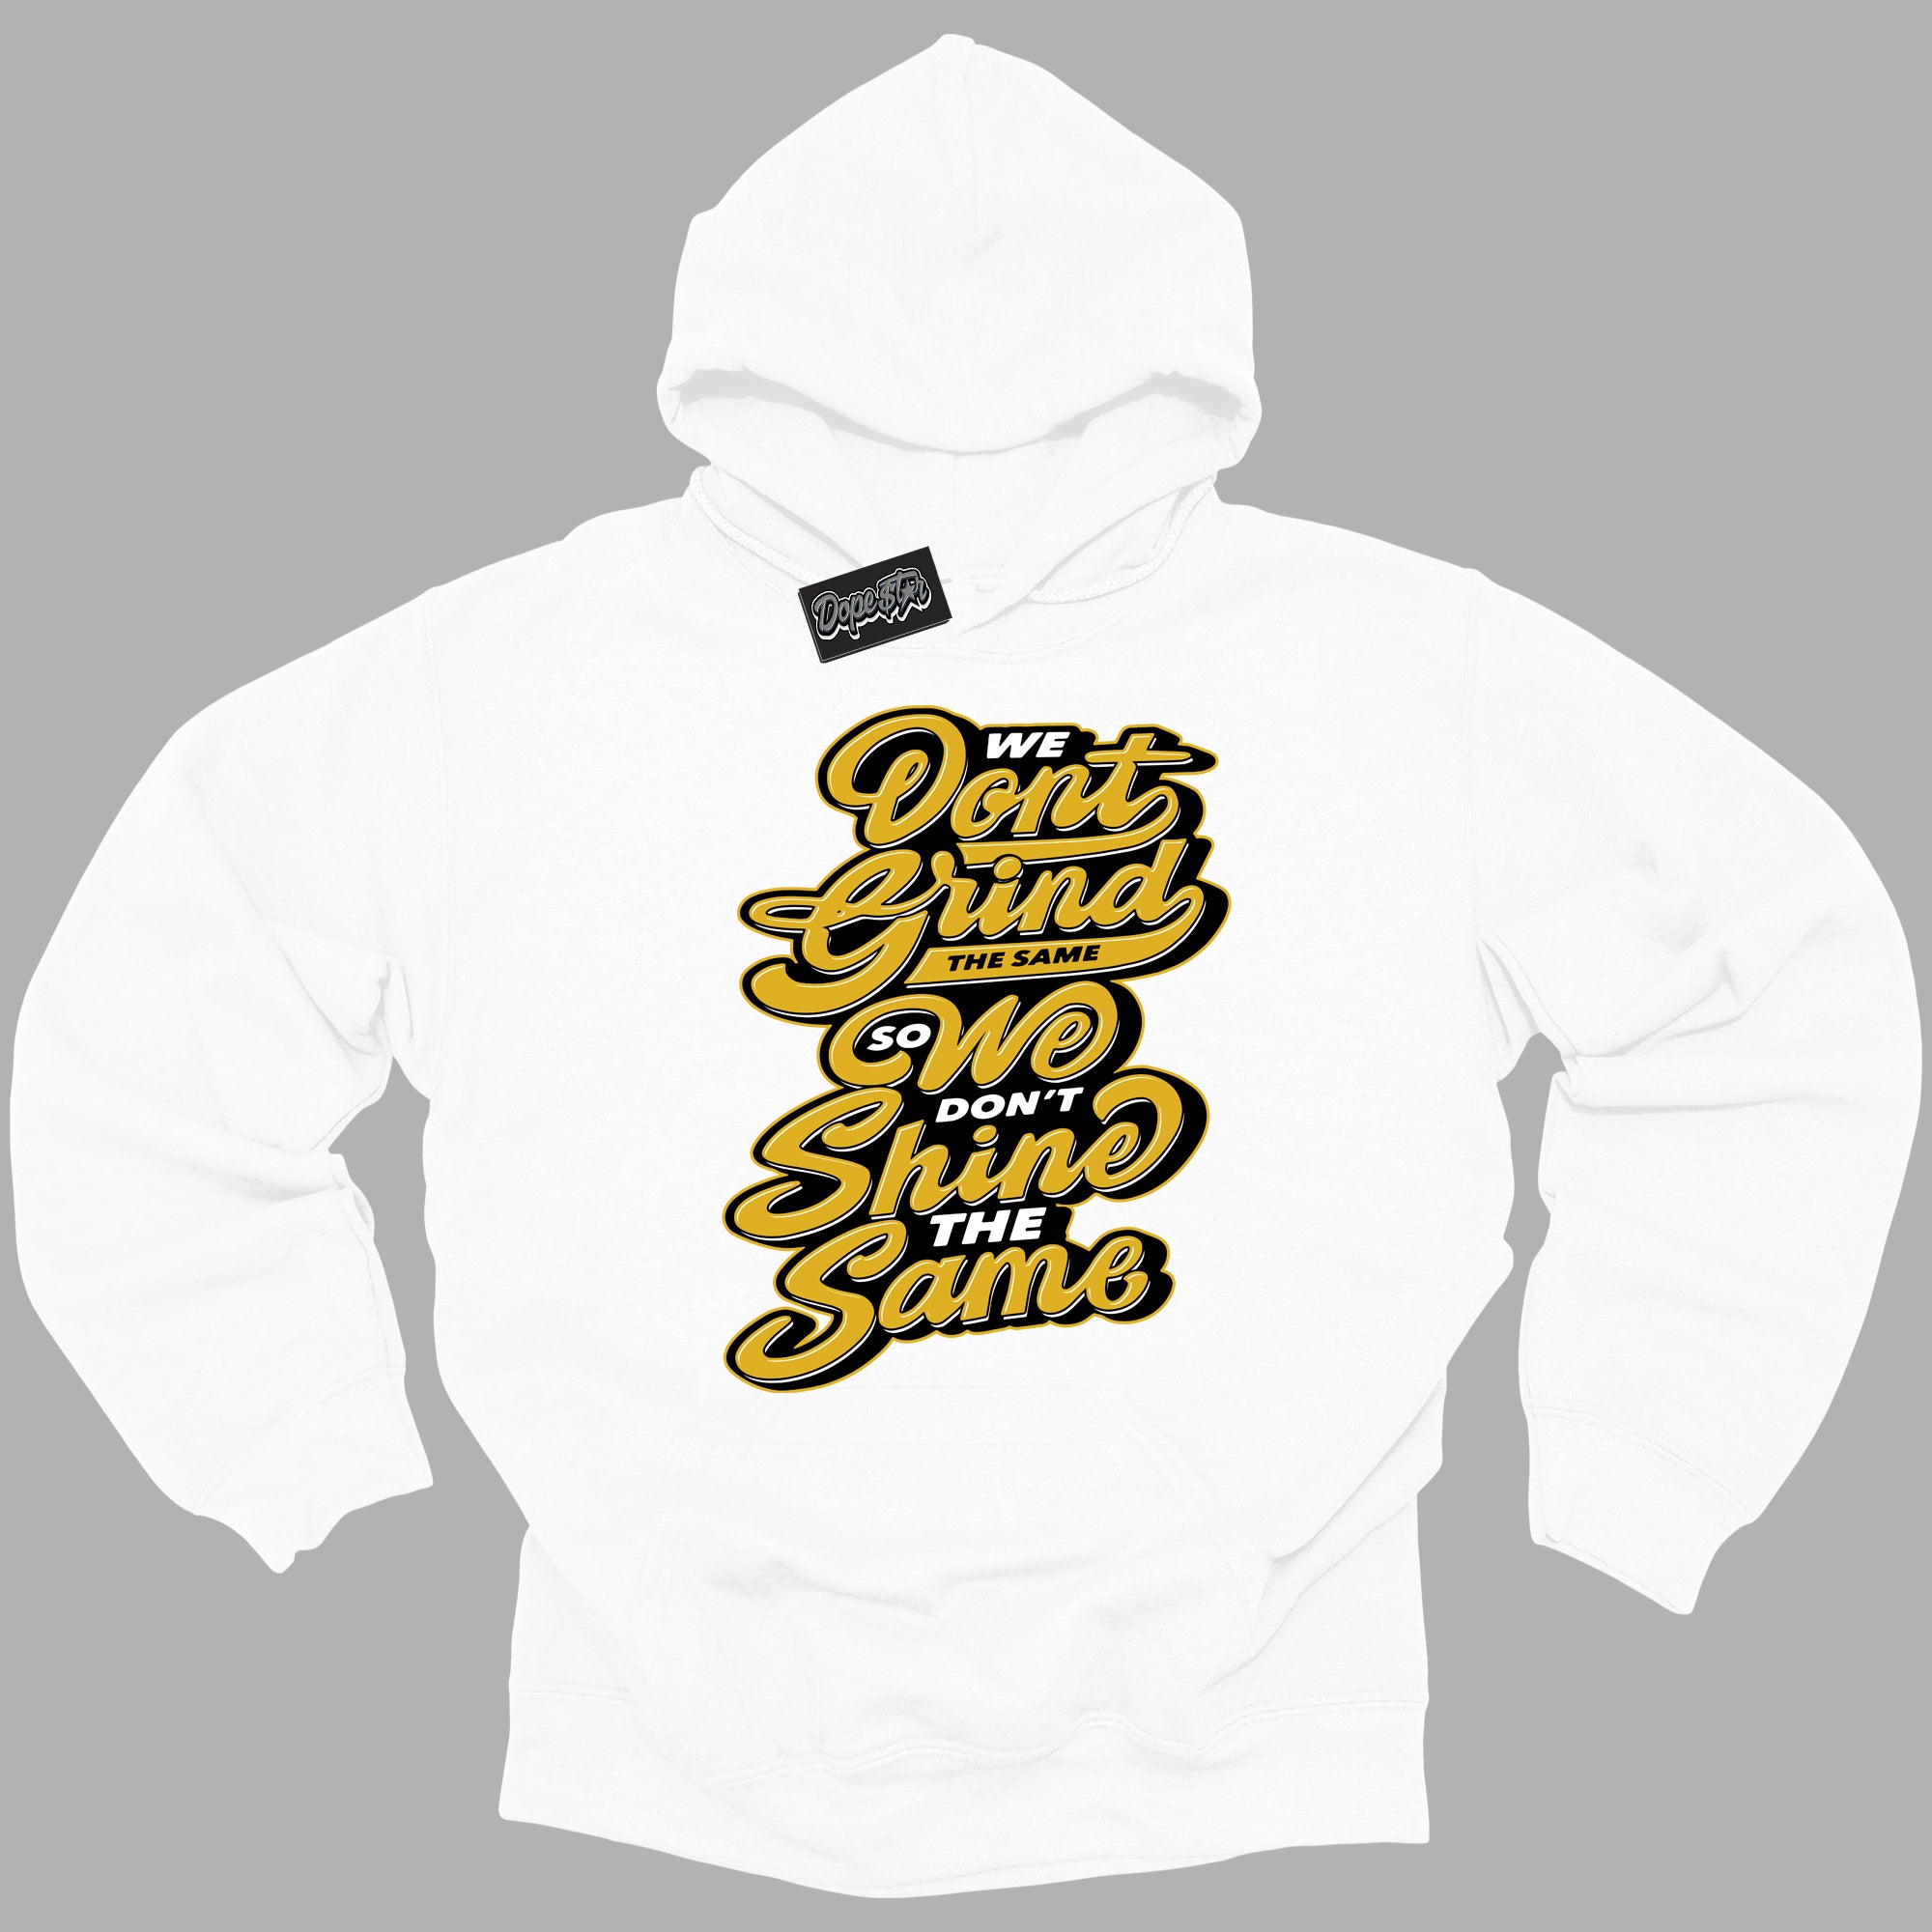 Cool White Hoodie with “ Grind Shine ”  design that Perfectly Matches Yellow Ochre 6s Sneakers.